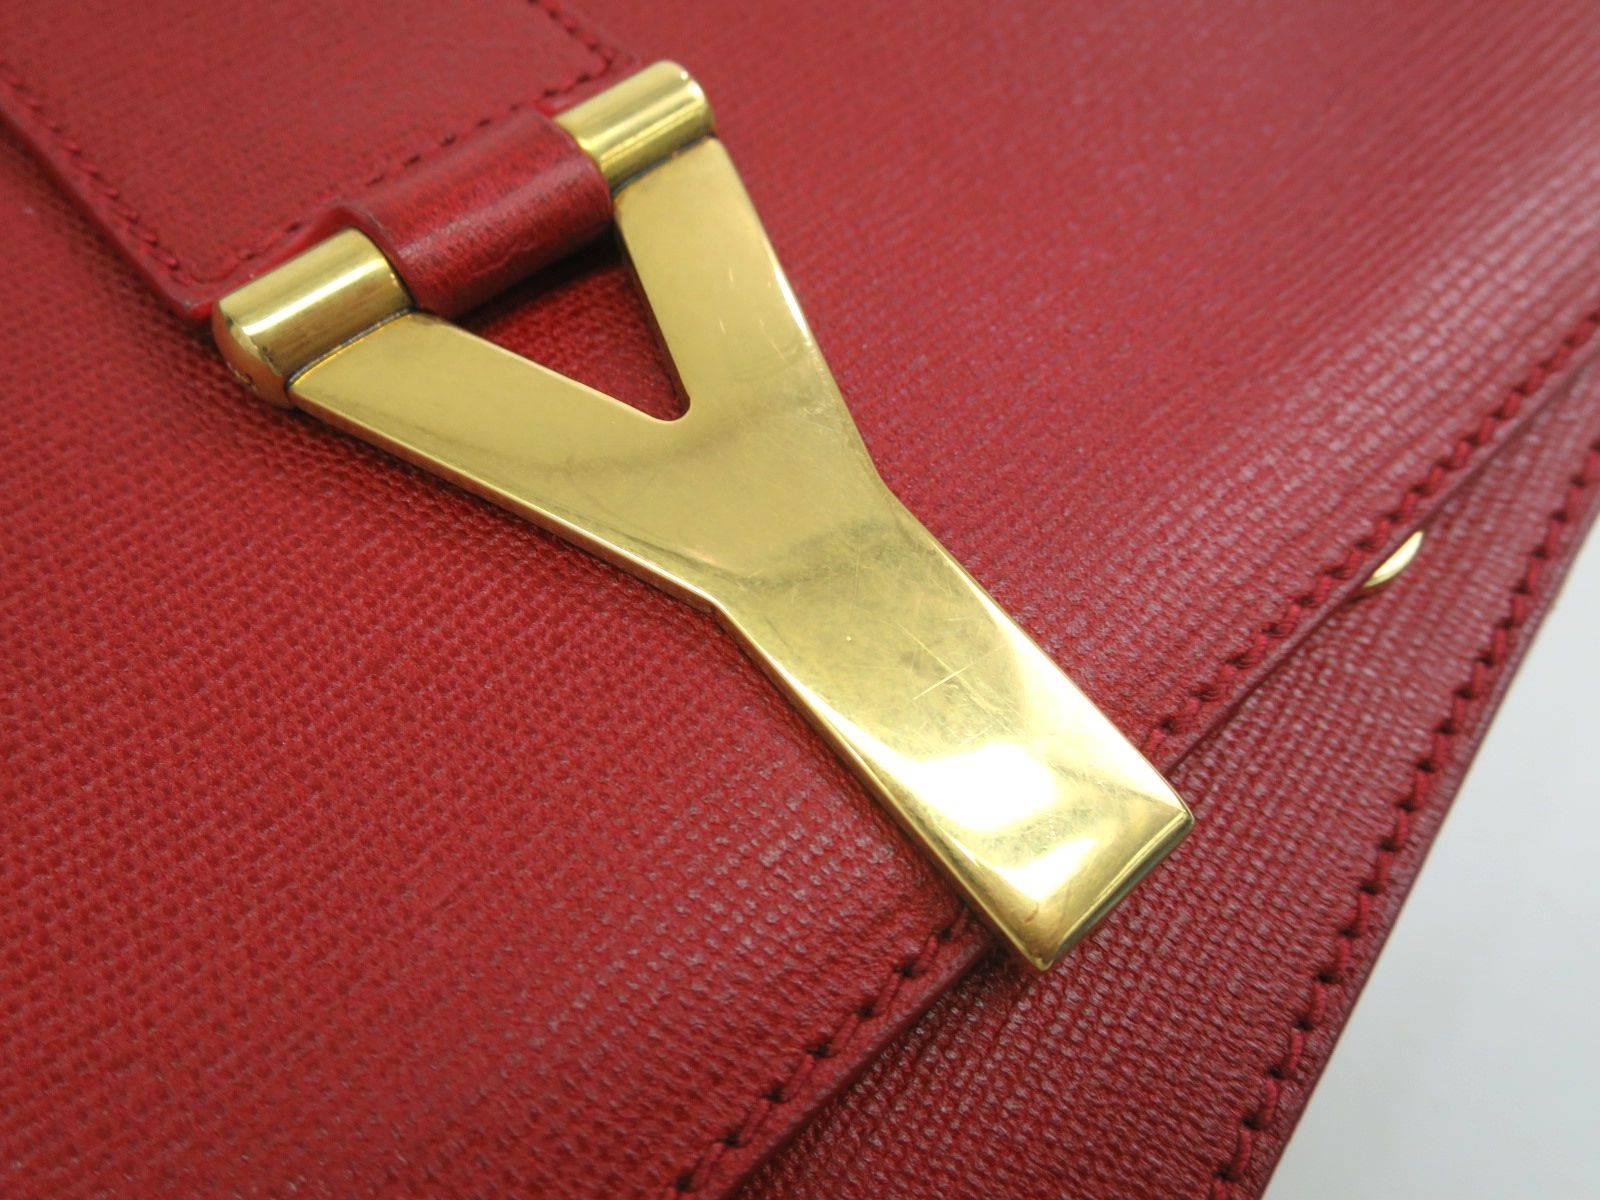 CURATOR'S NOTES

Chic, indeed! This stunning red Yves Saint Laurent Chyc Y shoulder bag features gold hardware, adjustable strap and statement Y flap.  

Style Tip: Wear it crossbody style with your favorite boyfriend jeans and blazer, or clutch